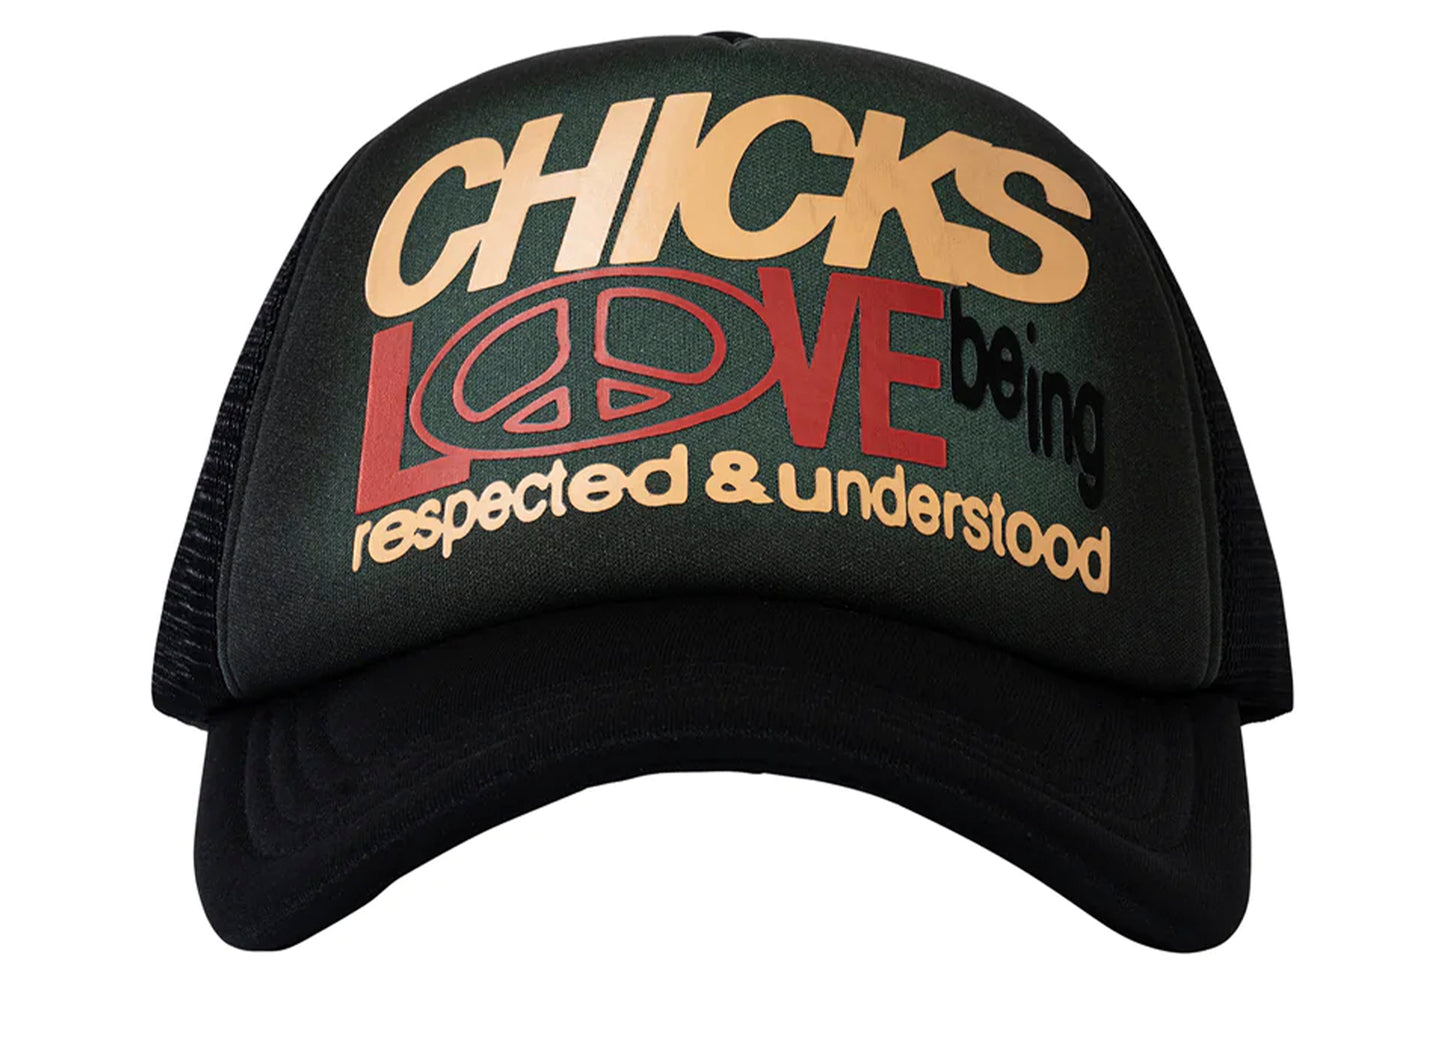 Market Respected and Understood Hat